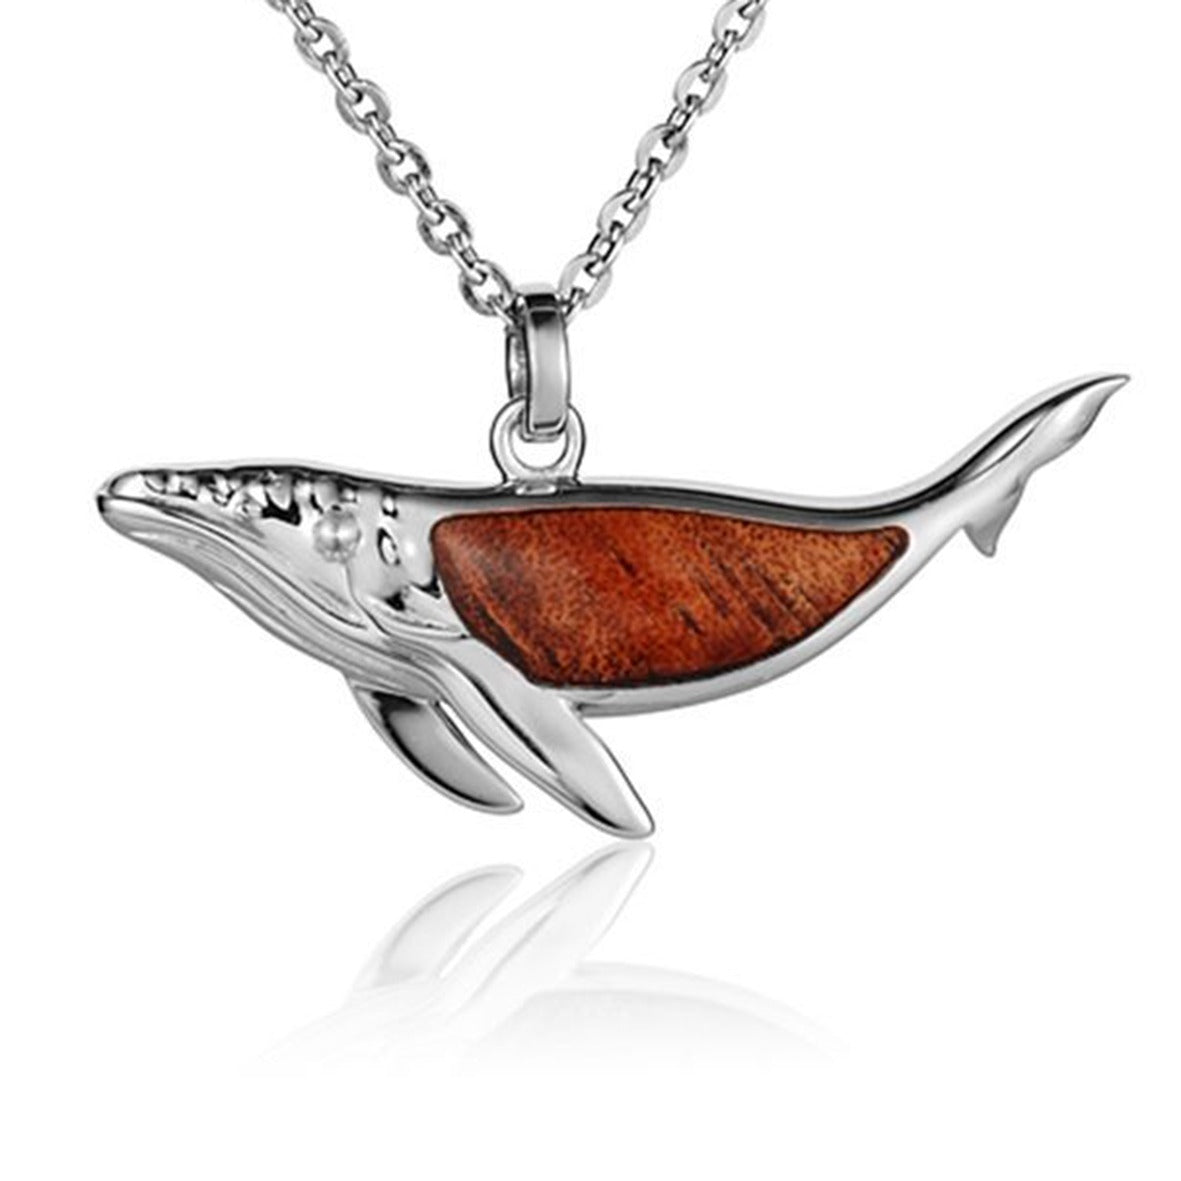 925 Silver Whale Pendant with Koa on a 40cm chain (included).